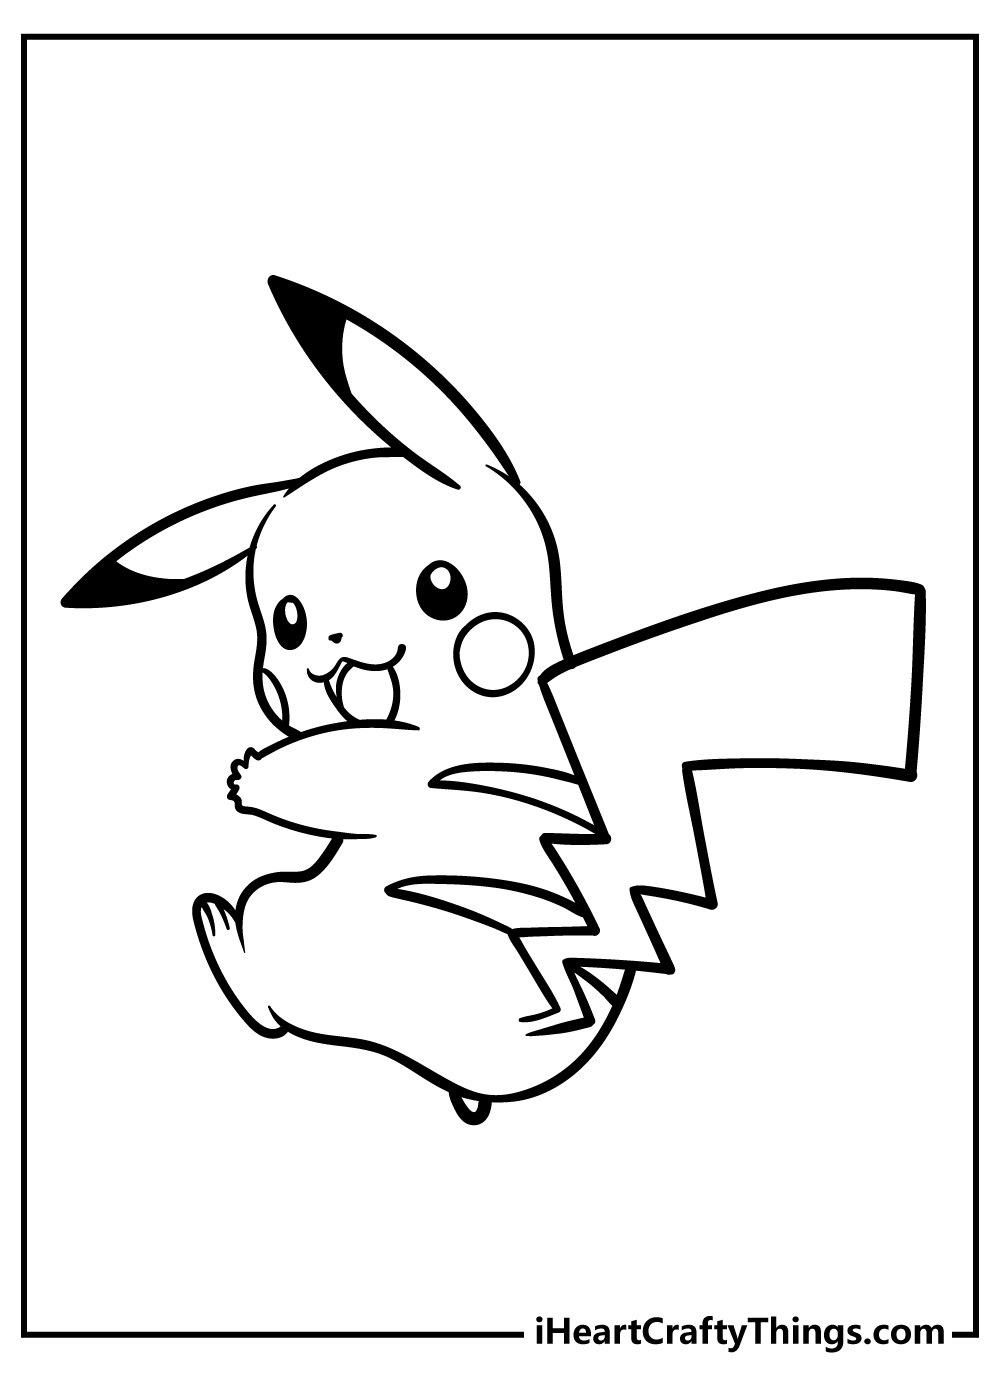 Pikachu Coloring Pages free printable